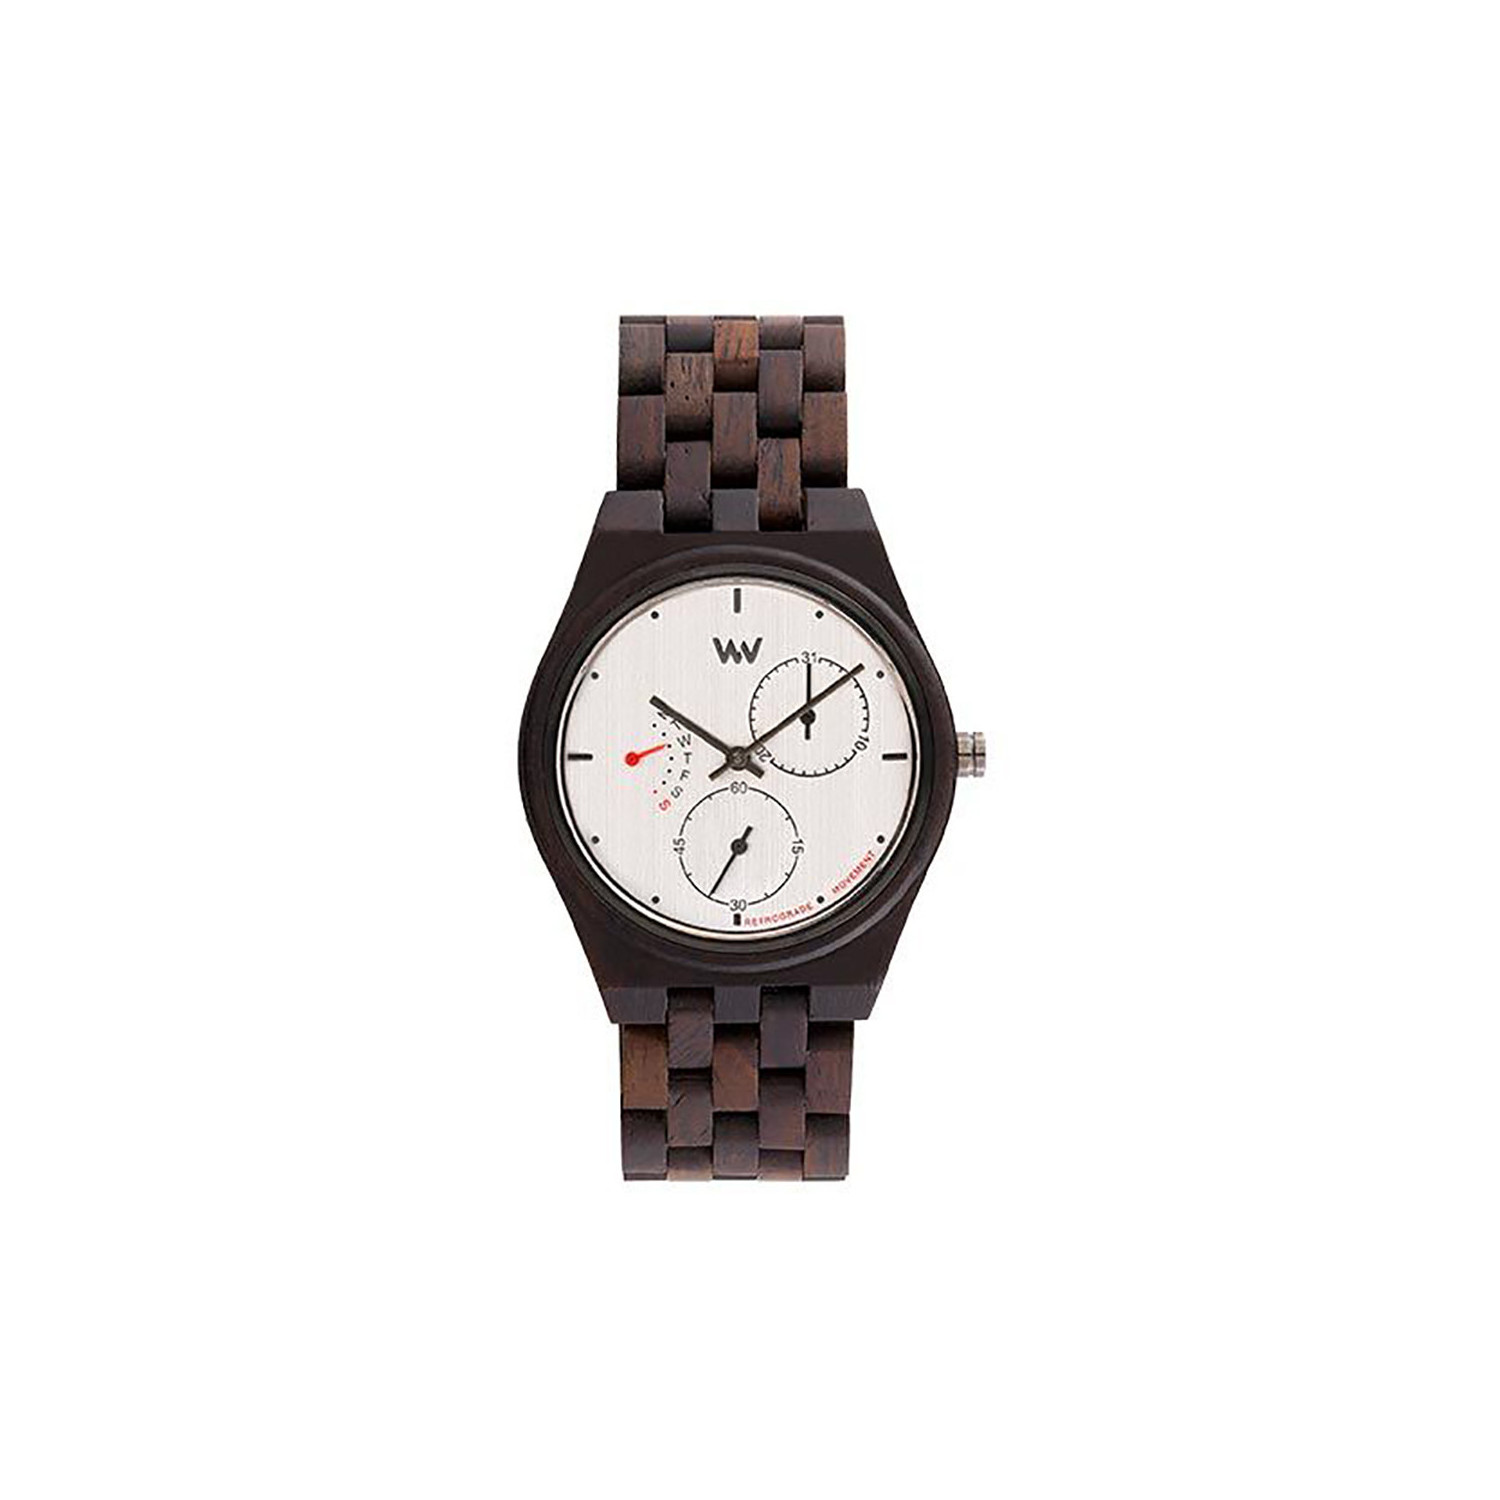 Montre bois Wewood Rider choco silver